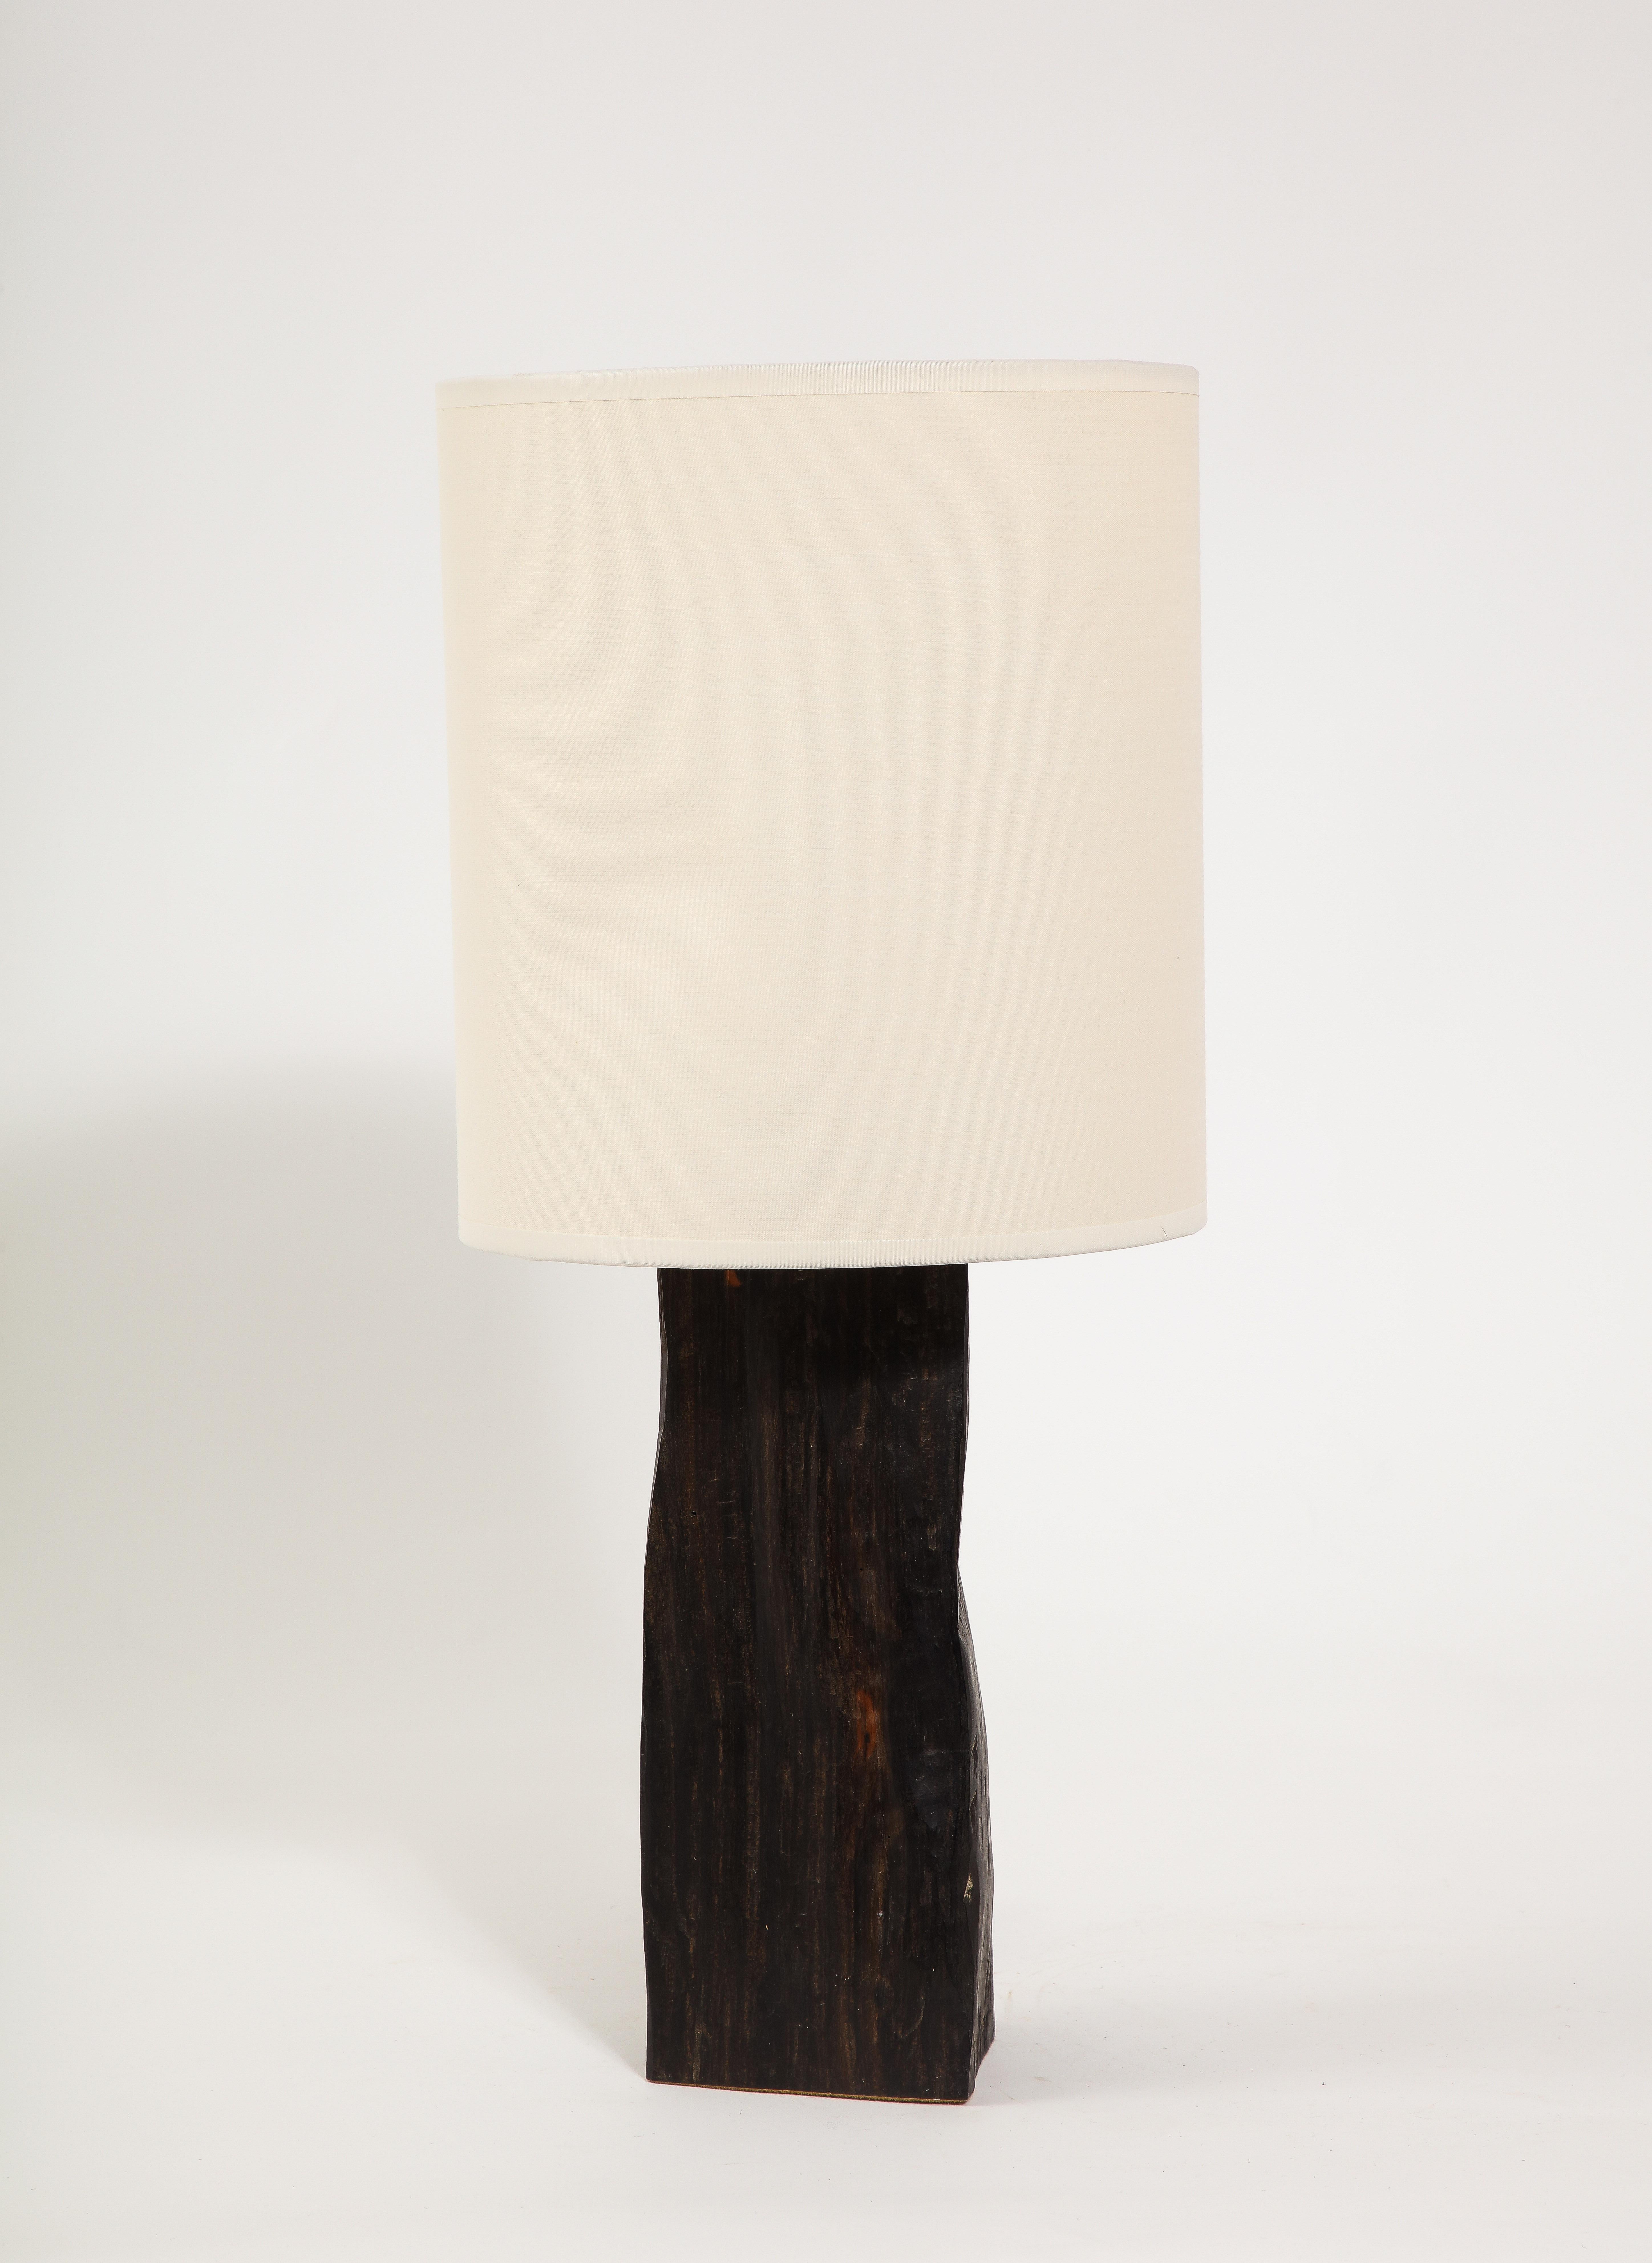 Solid Ebony table lamp with a hand-polished finish

11x5x4 Base only
